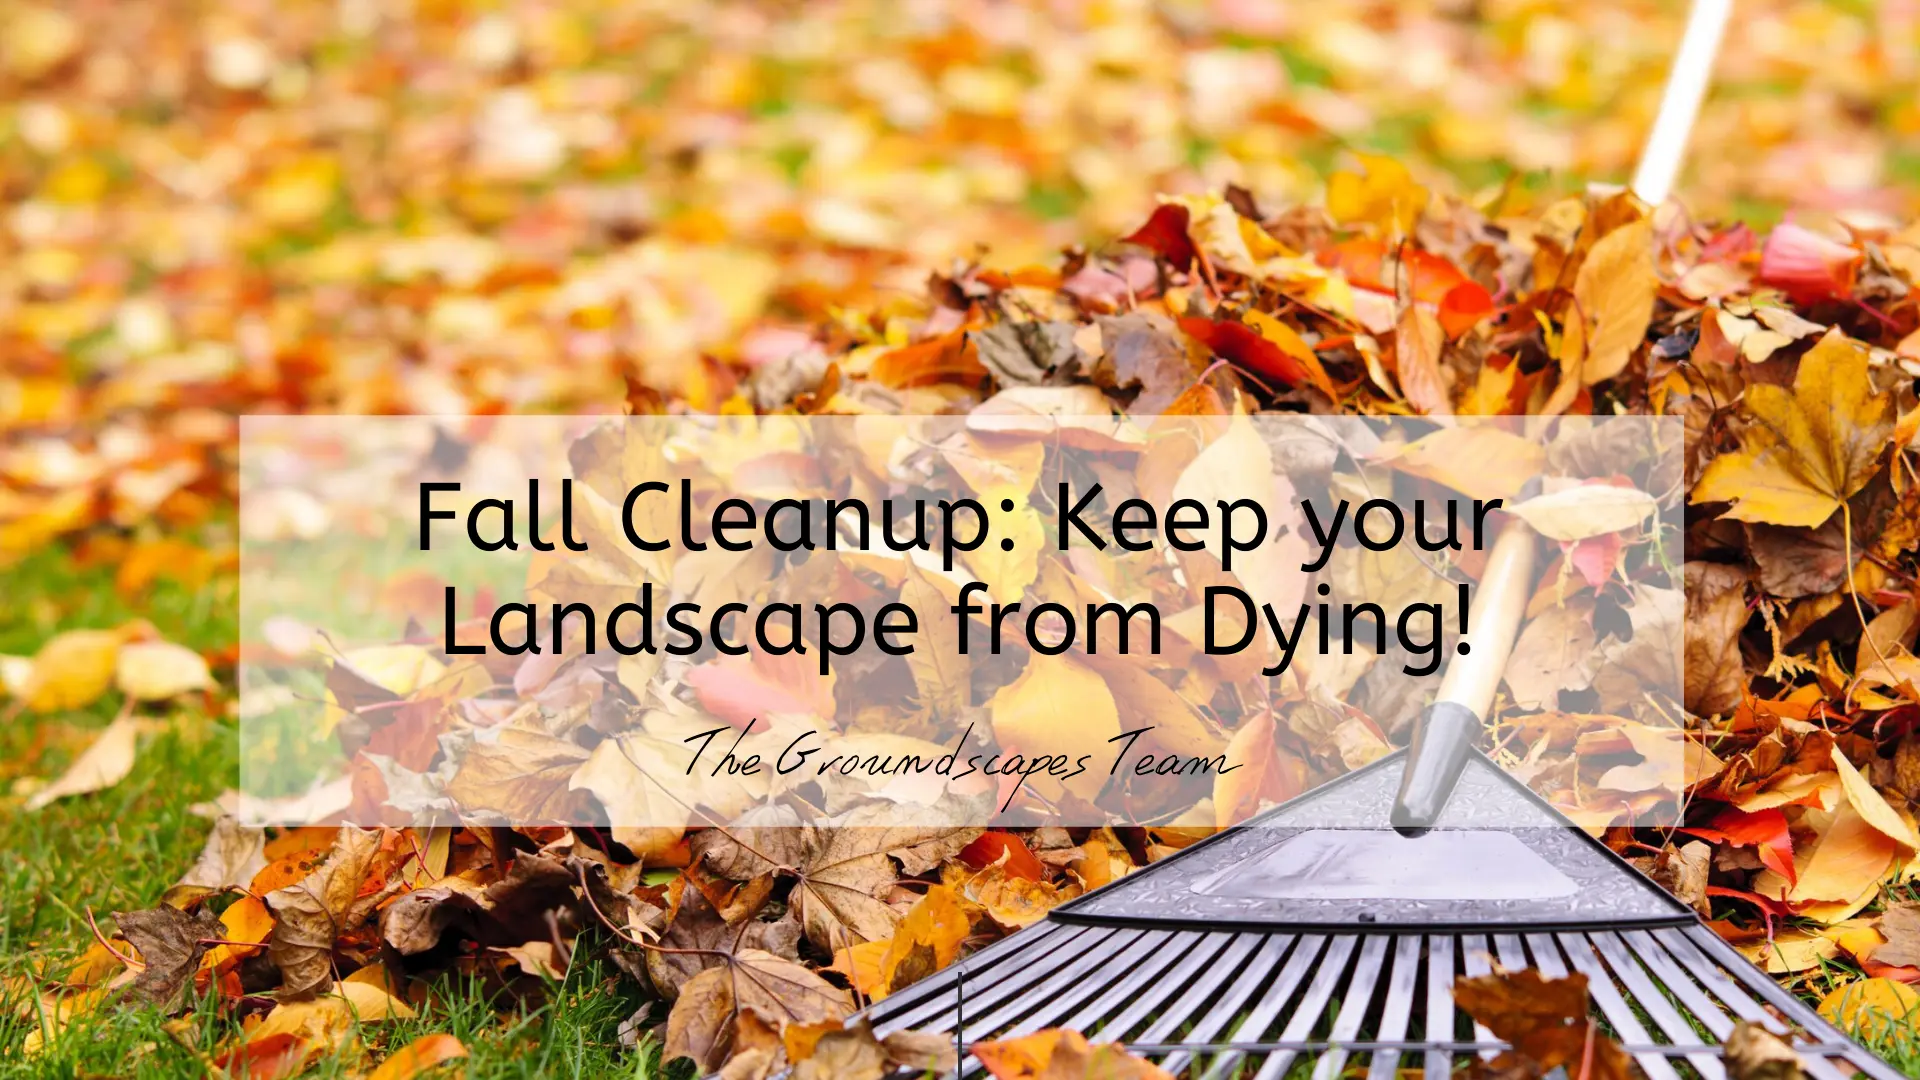 Fall Cleanup: Keep Your Landscape from Dying!